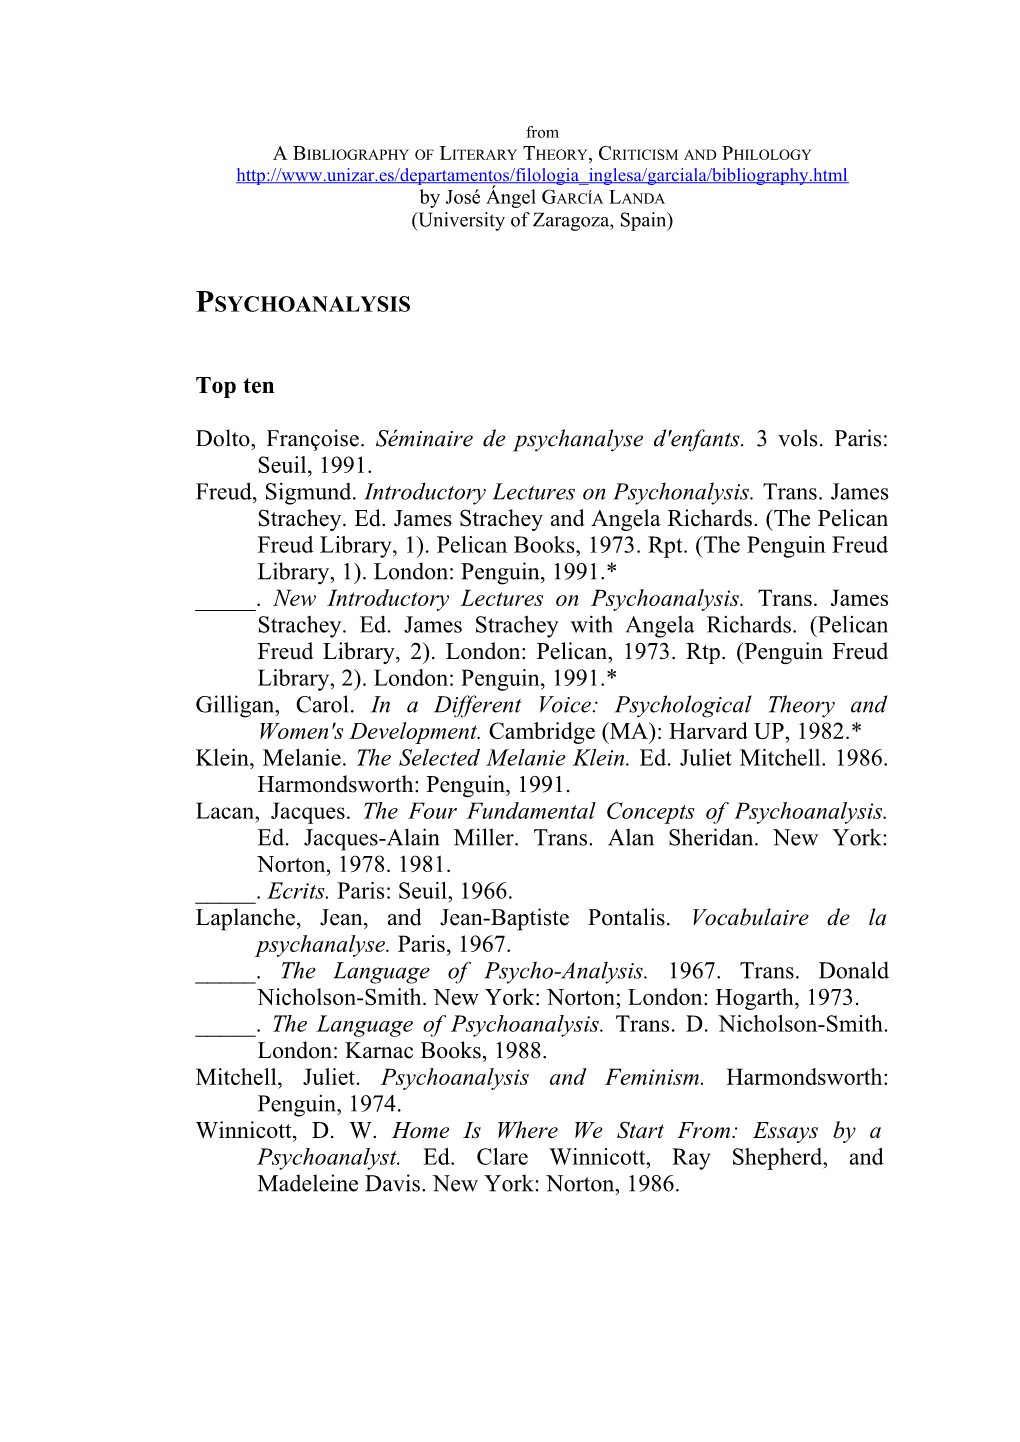 A Bibliography of Literary Theory, Criticism and Philology s22